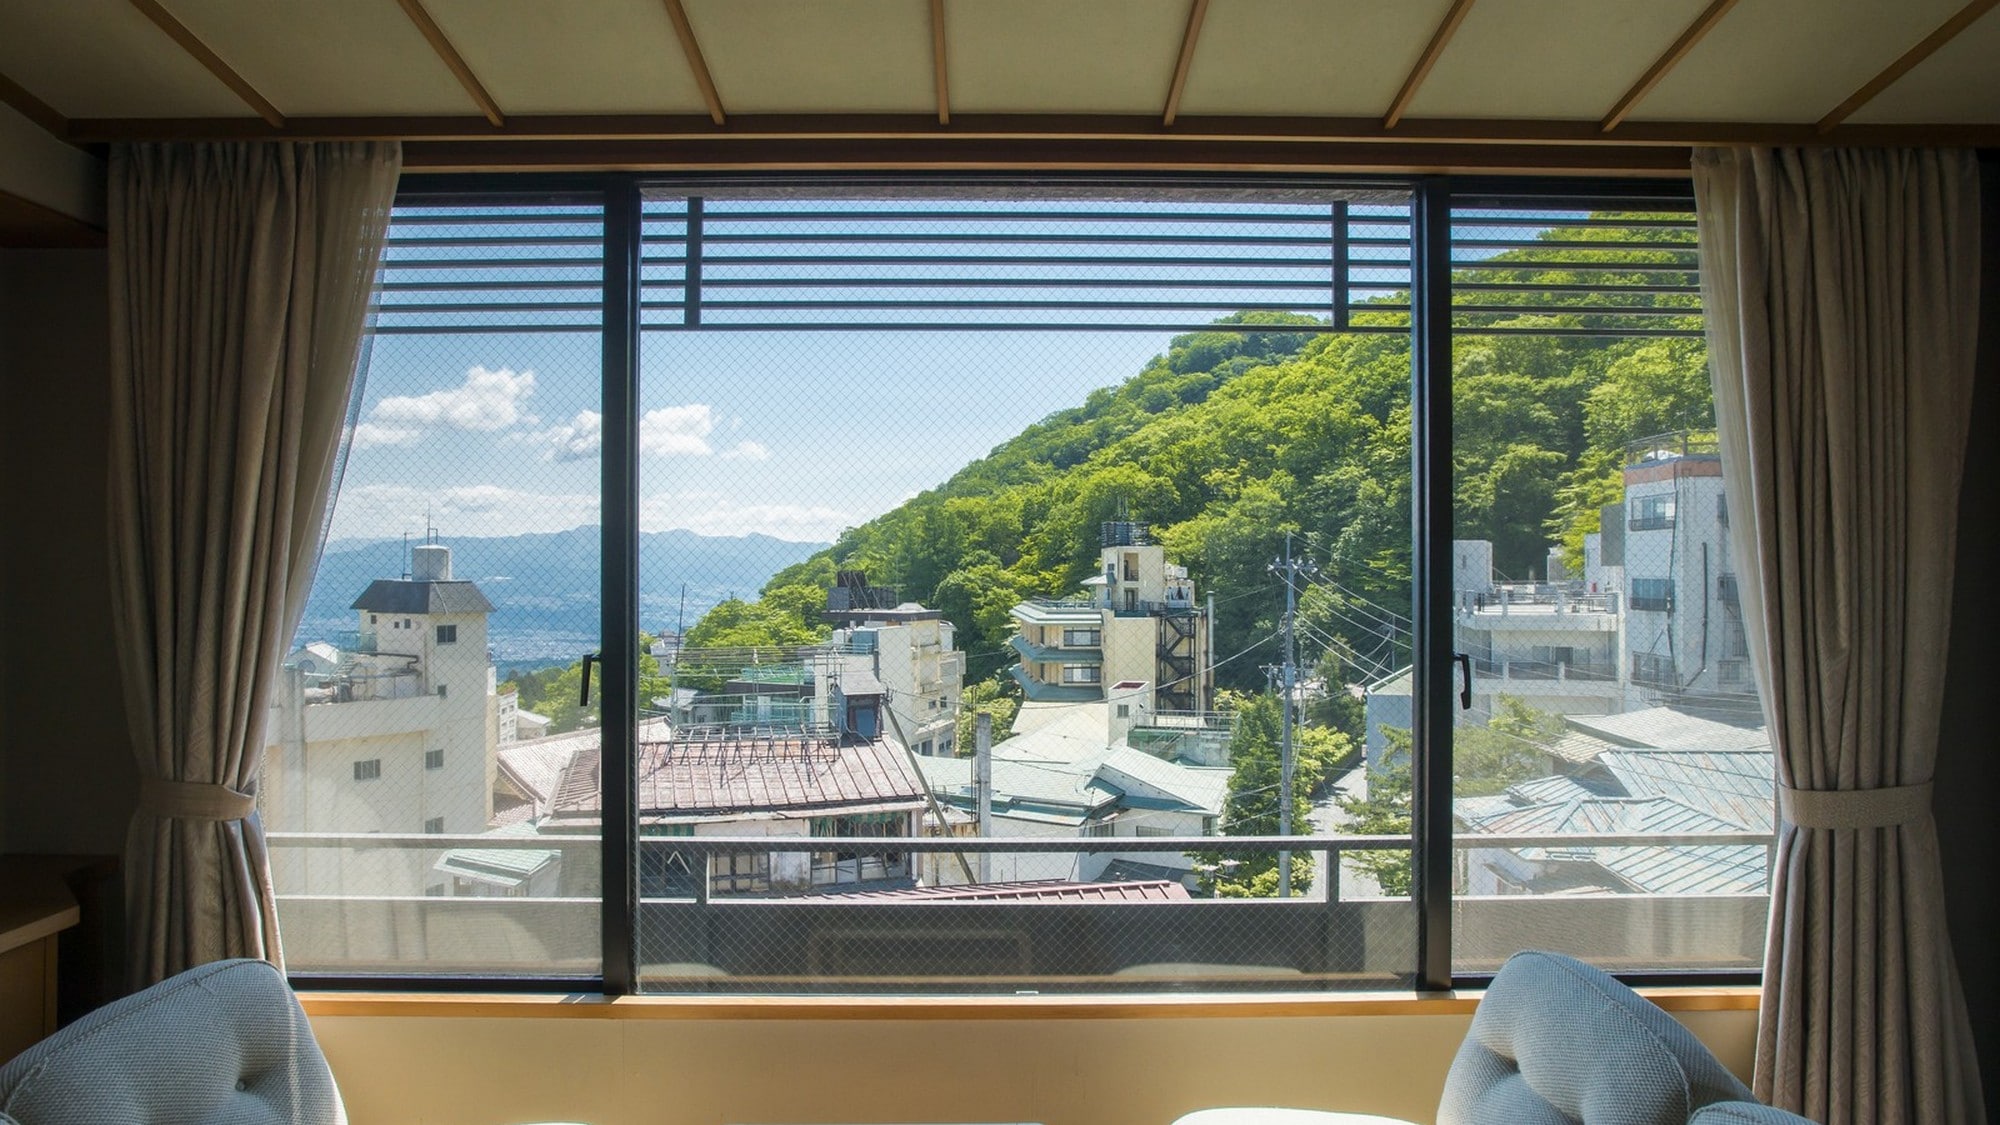 One of the features is the Japanese view from the room.